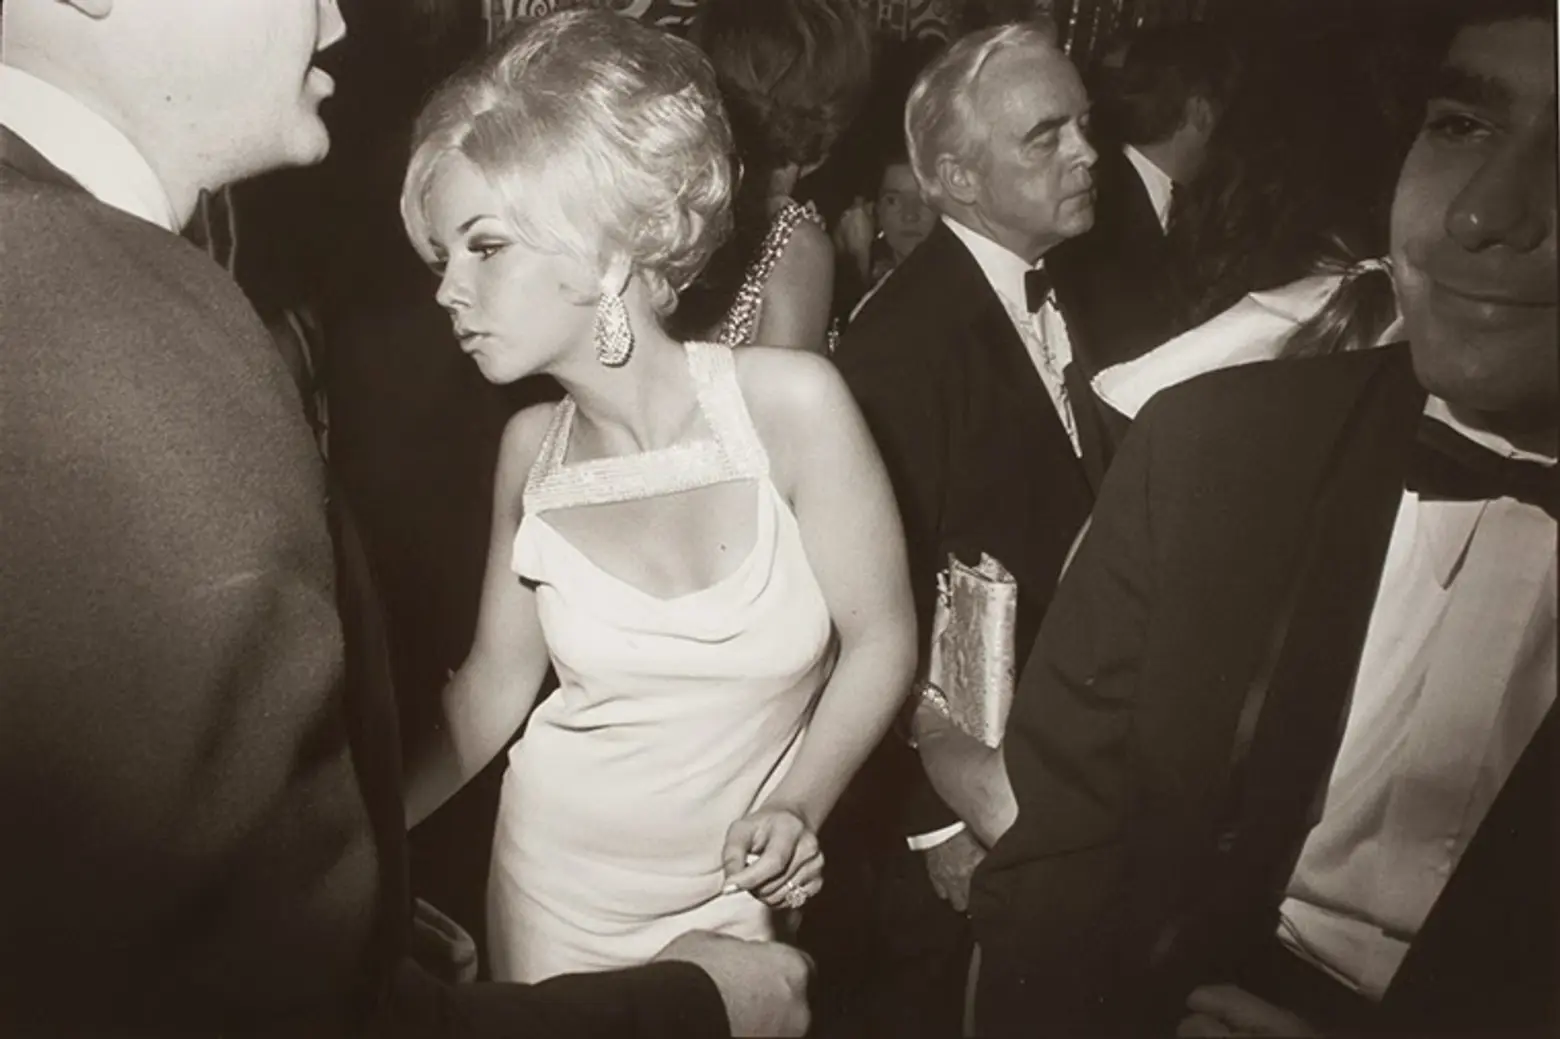 1960s by Garry Winogrand